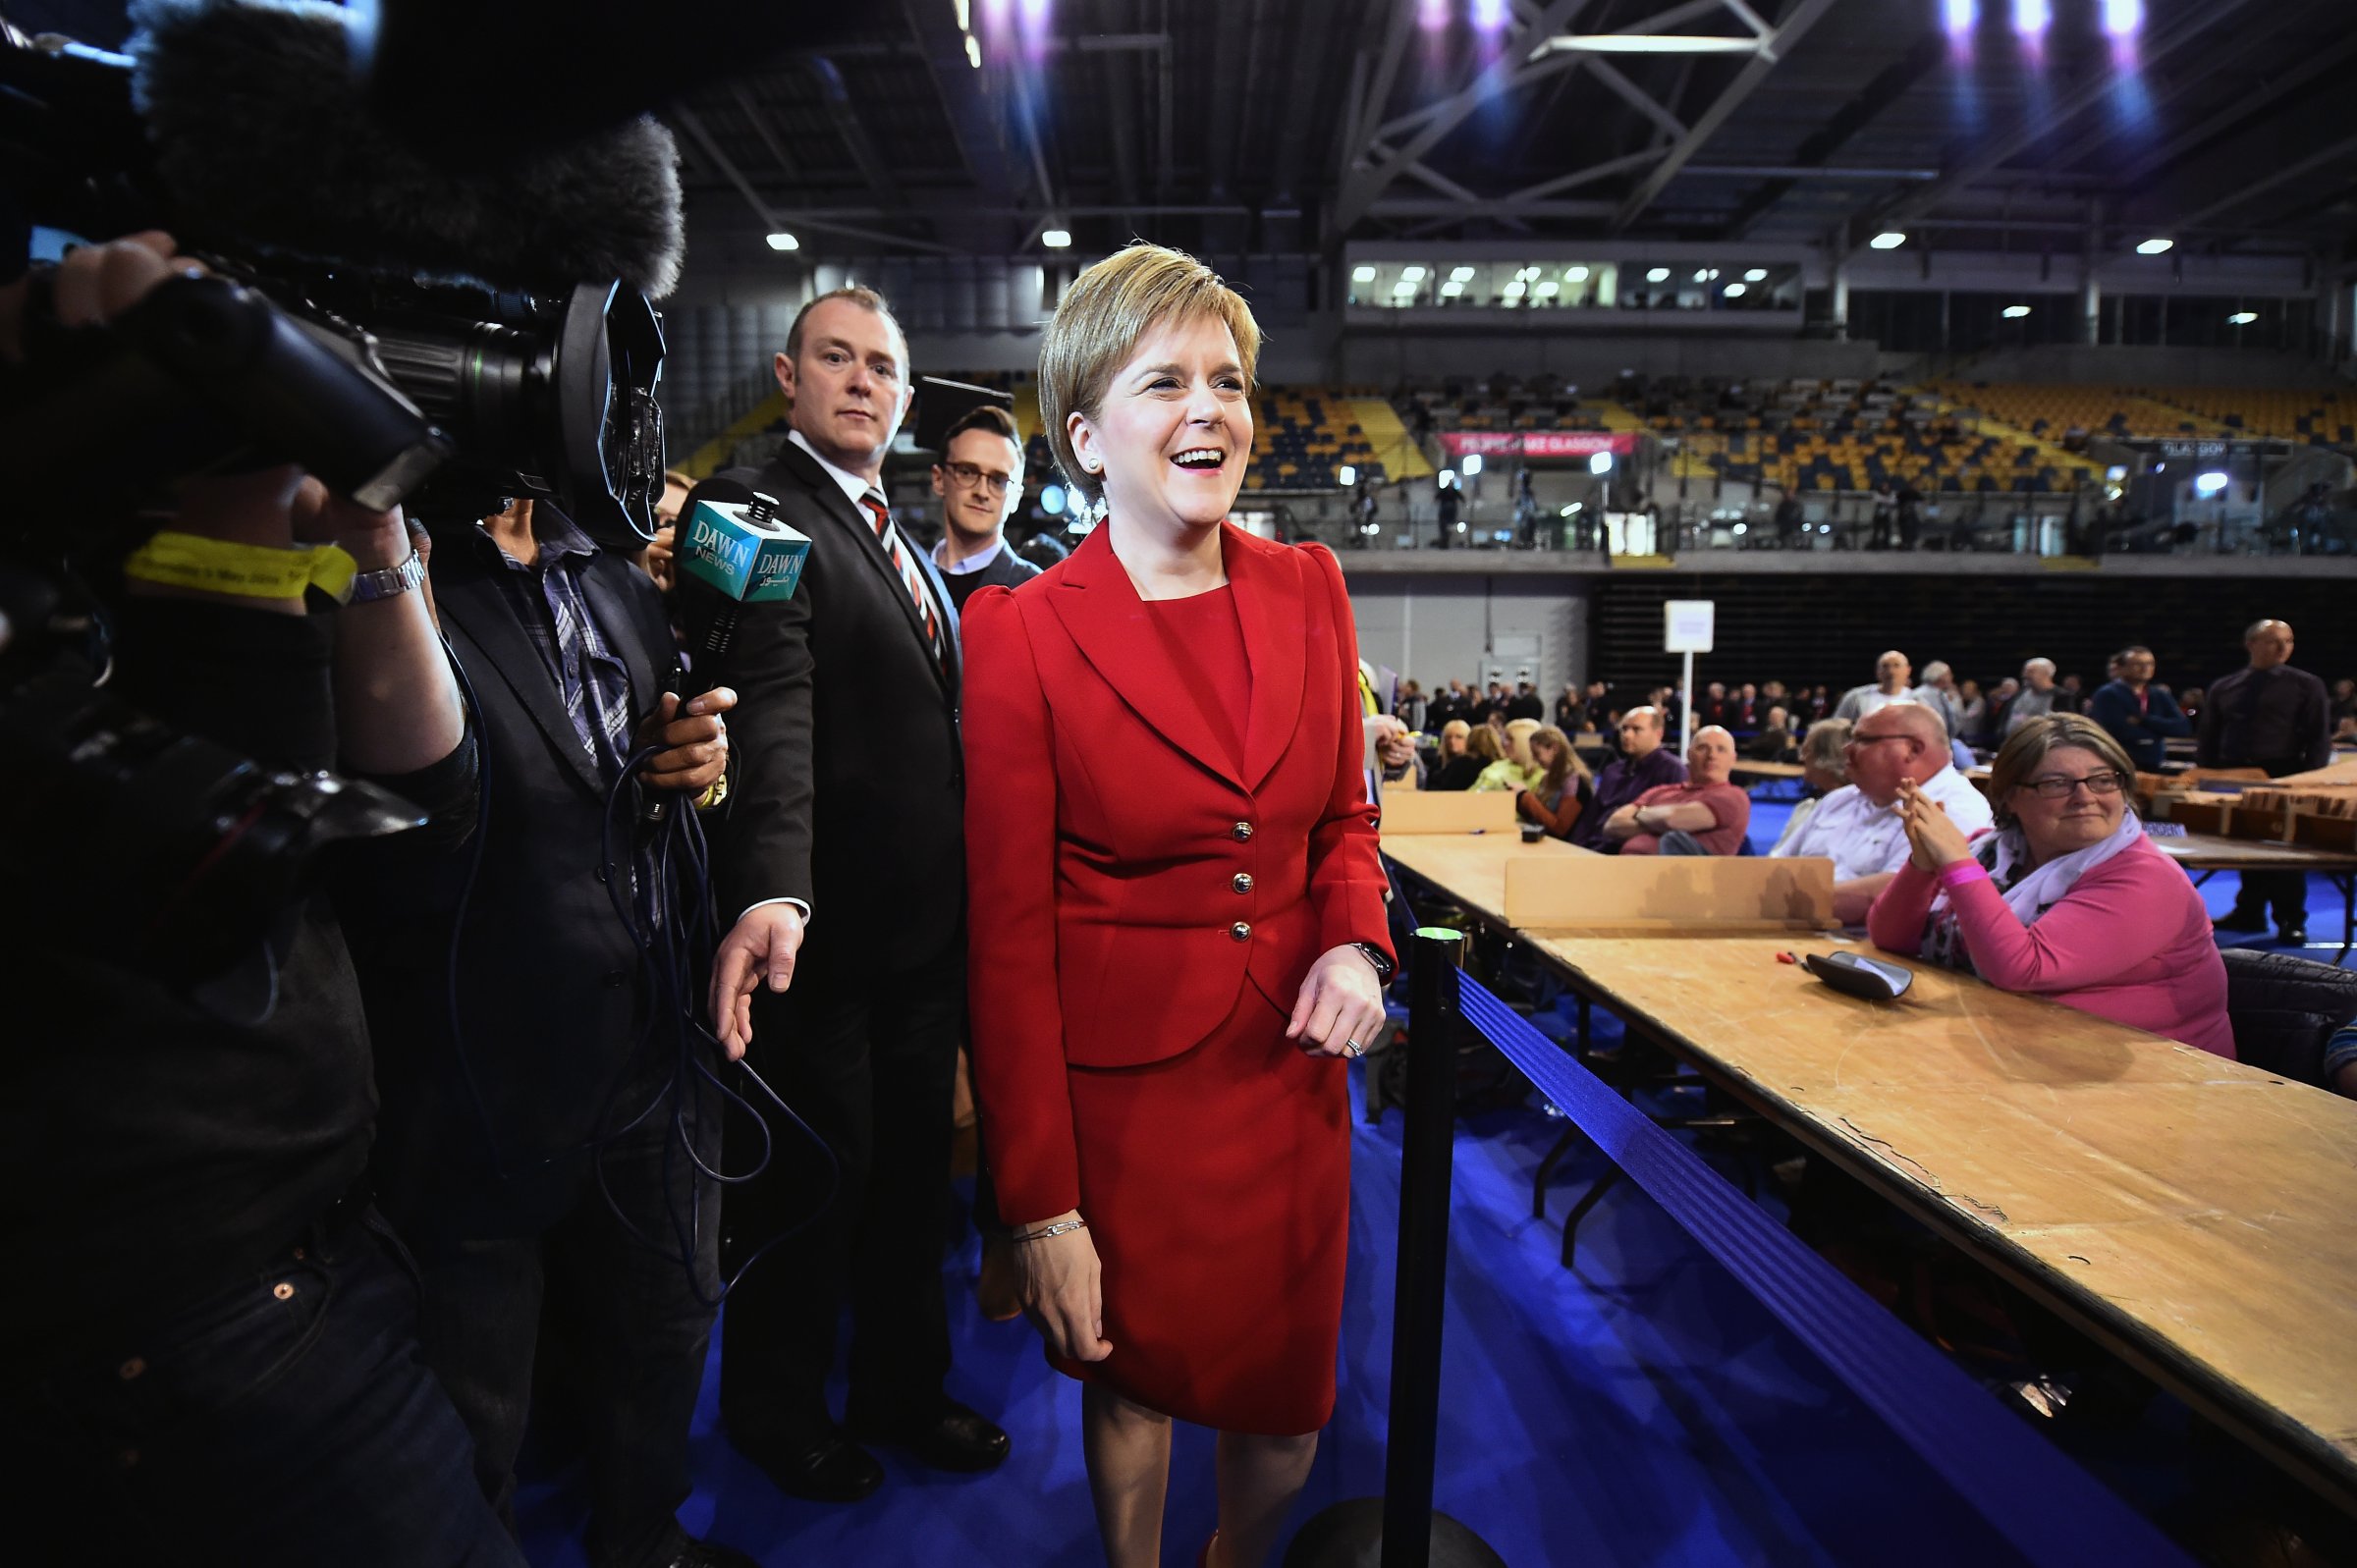 SNP leader Nicola Sturgeon arrives at the count for the Scottish Parliament elections at the Emirates Arena on May 6, 2016 in Glasgow,Scotland.